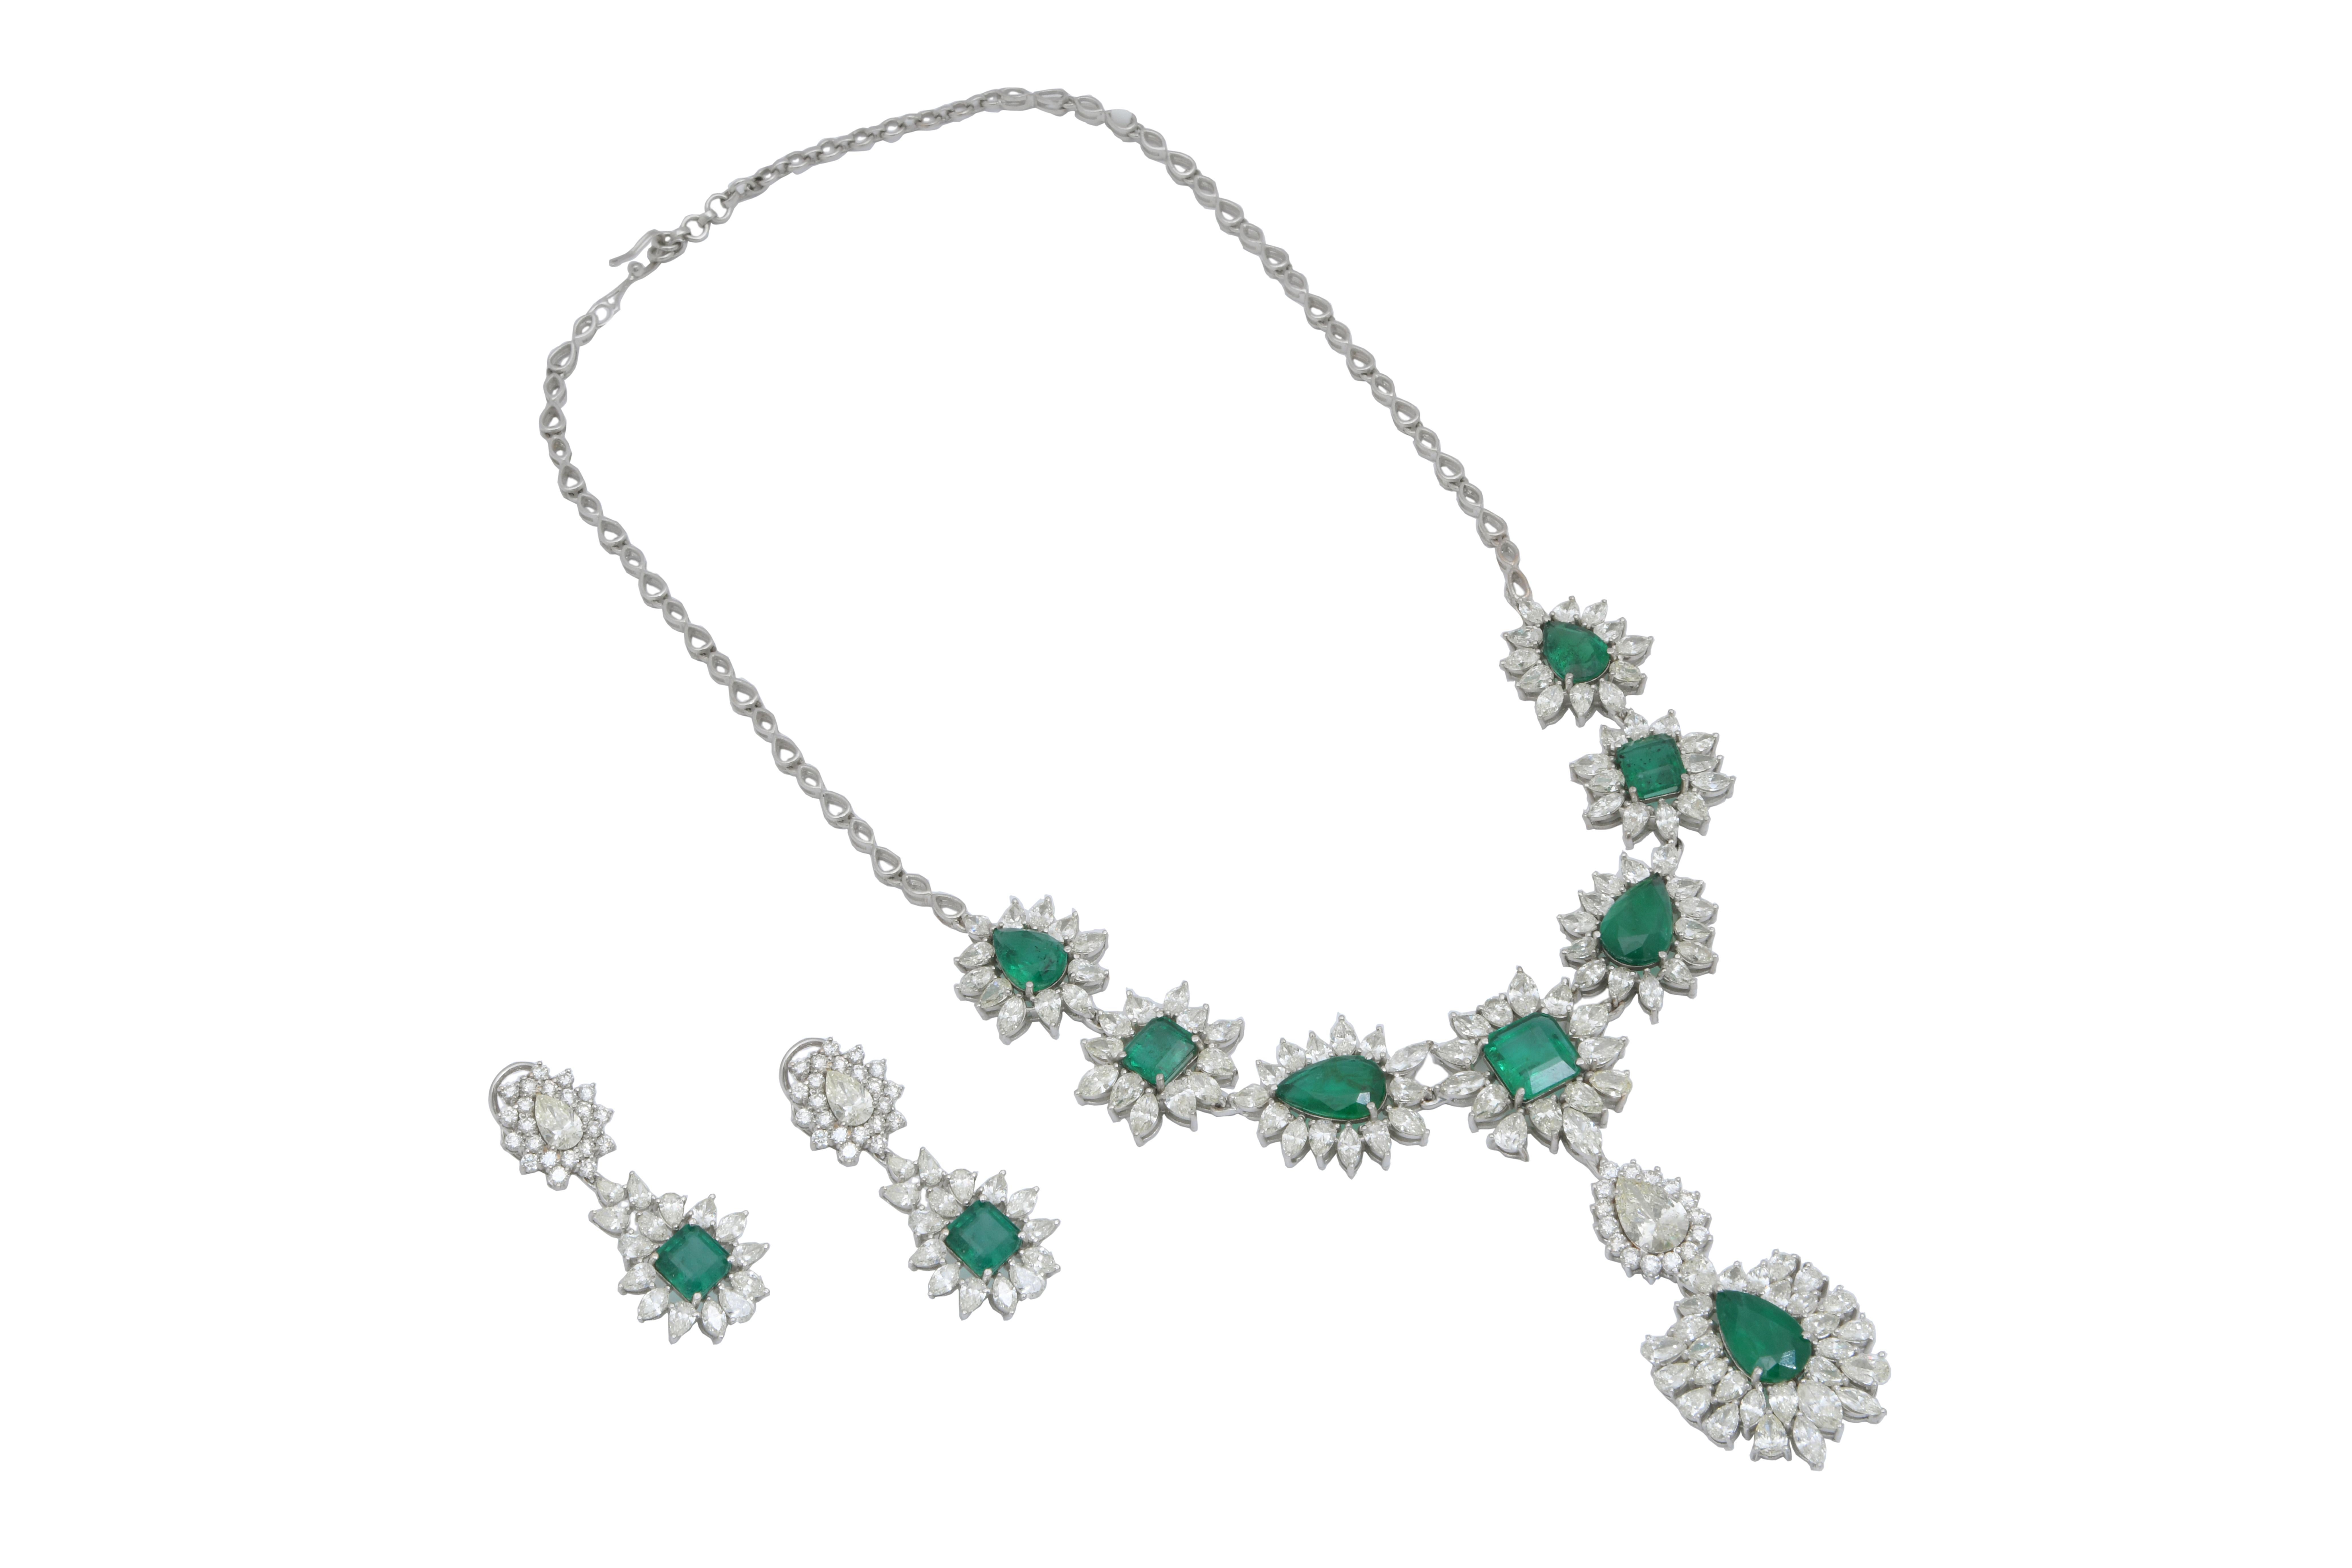 this is an amazing necklace set with
diamond : 36.29 carats
emerald : 28.53 carats
gold : 43.826 gms
Please read my reviews to make yourself comfortable.
I don't want to sell just one time but make customers for life.
All our jewelry comes with a